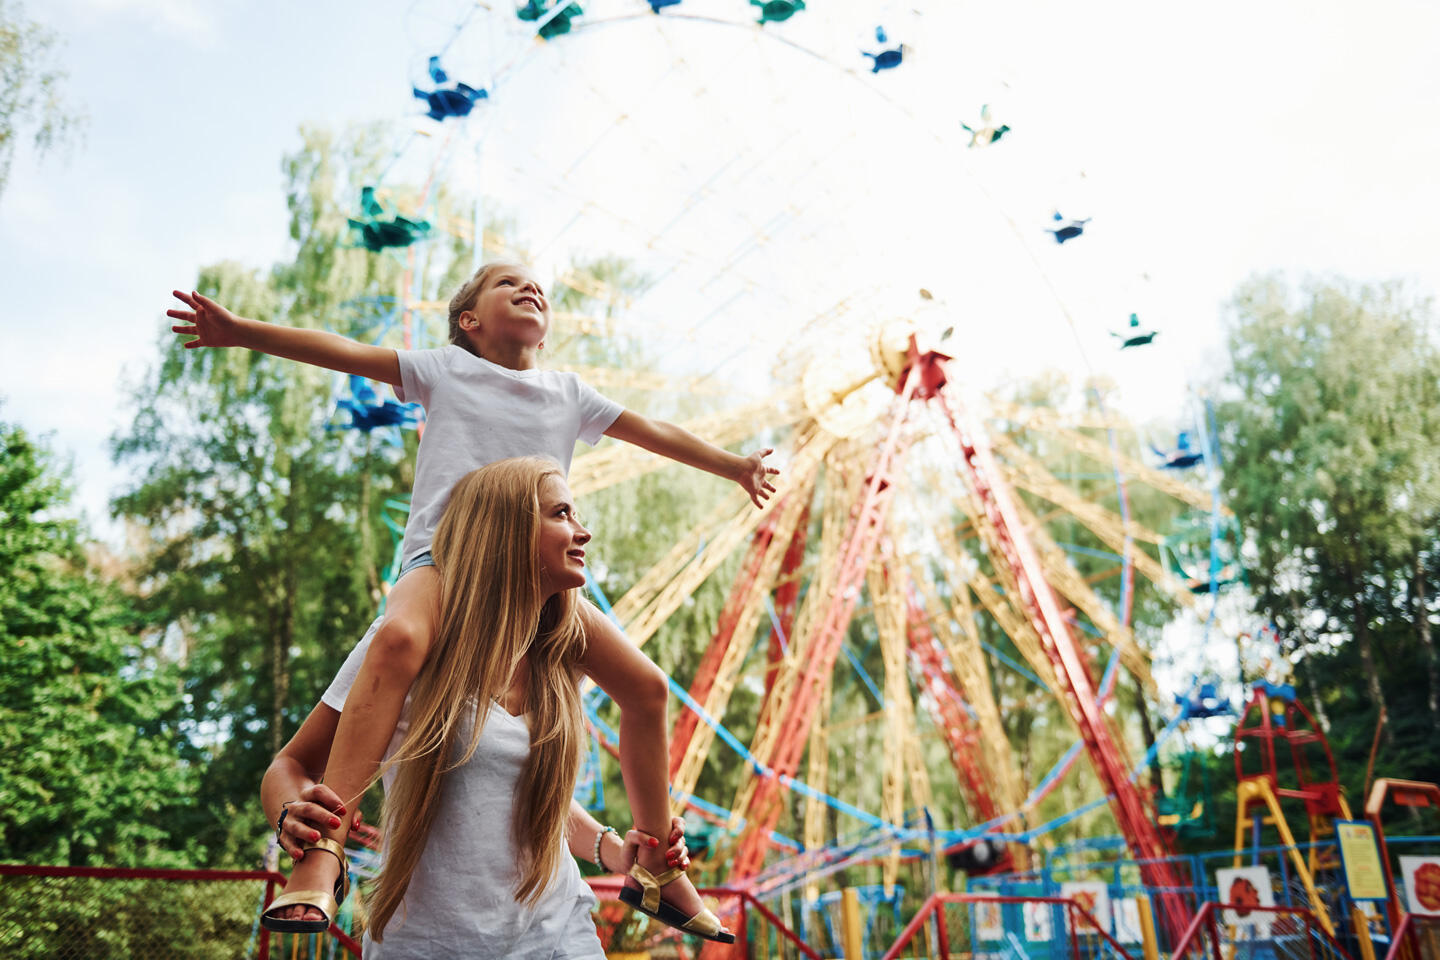 Smiling child on a woman's shoulders, raising arms in the air with a colorful Ferris wheel in the background, symbolizing happiness and fun at Antibes Land Park.